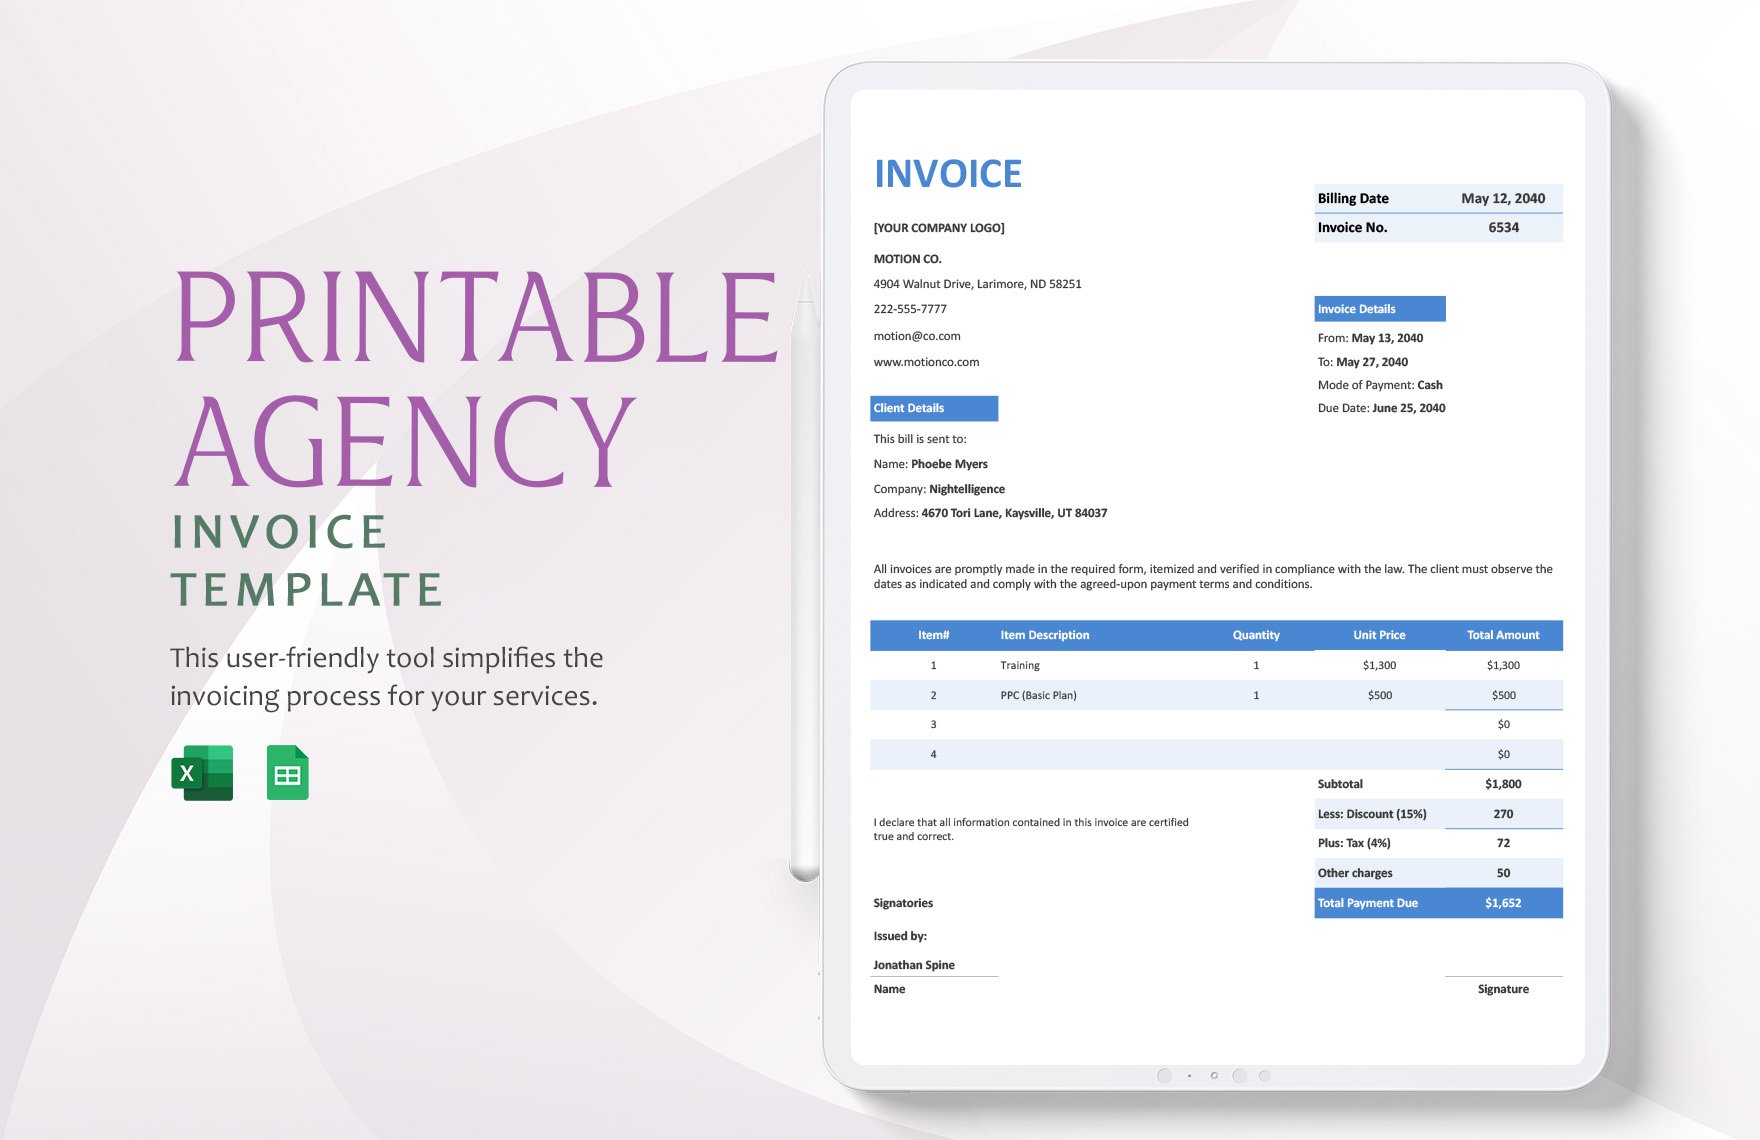 Printable Agency Invoice Template in Word, Google Docs, Excel, Google Sheets, Apple Pages